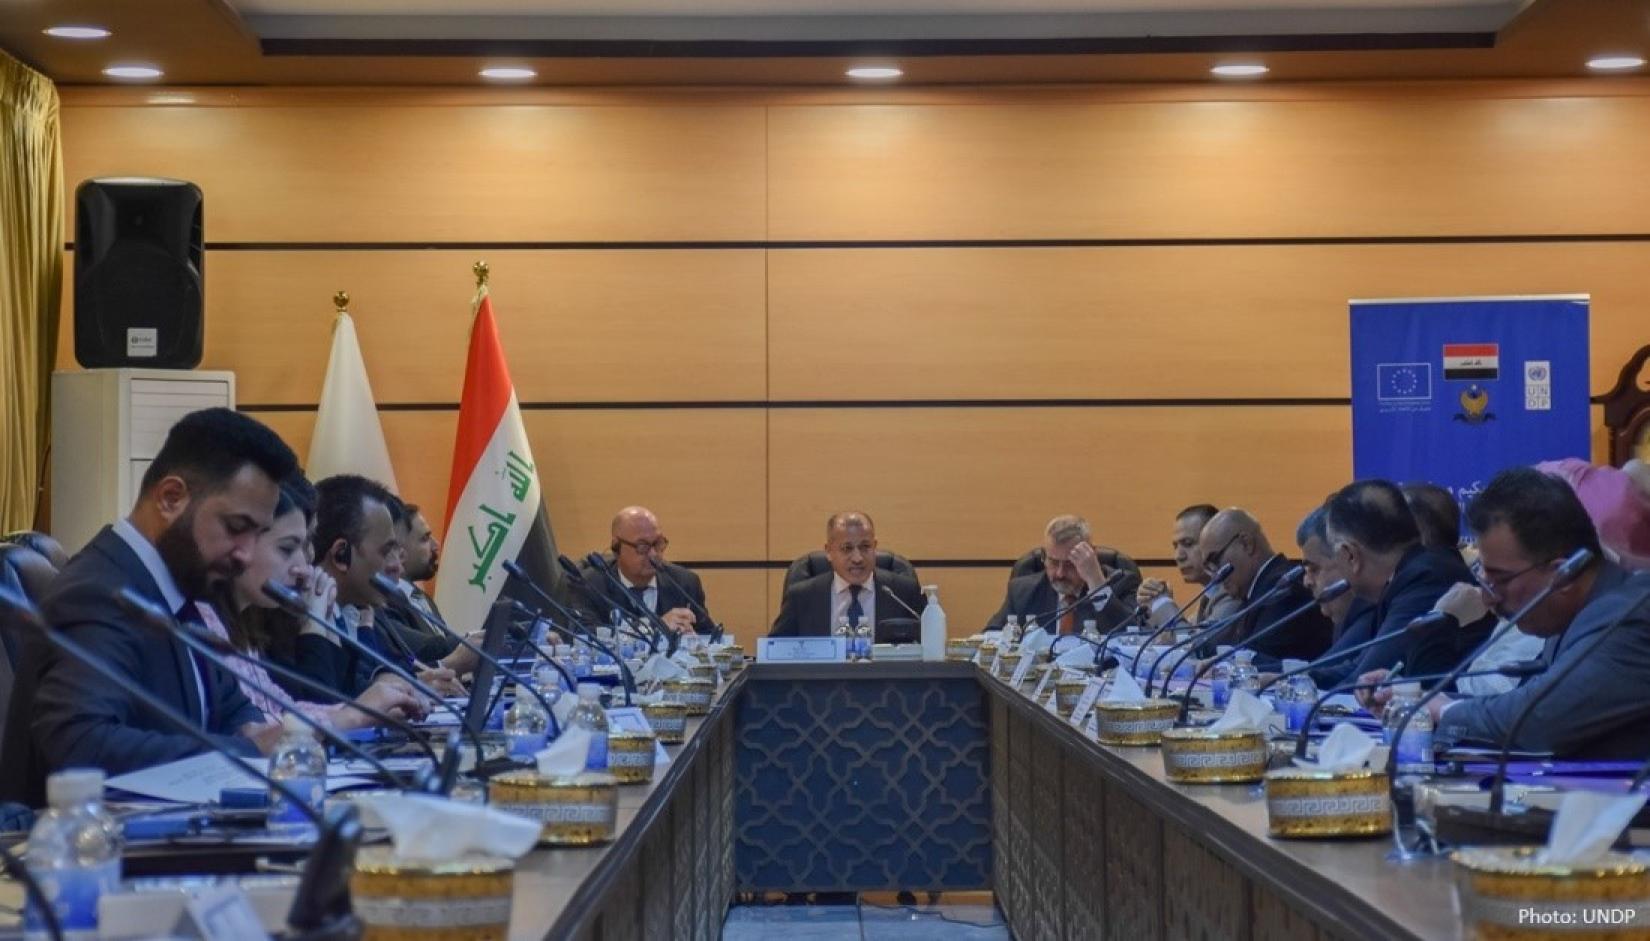 UNDP continues to support the Government of Iraq in ending corruption and boosting foreign investment